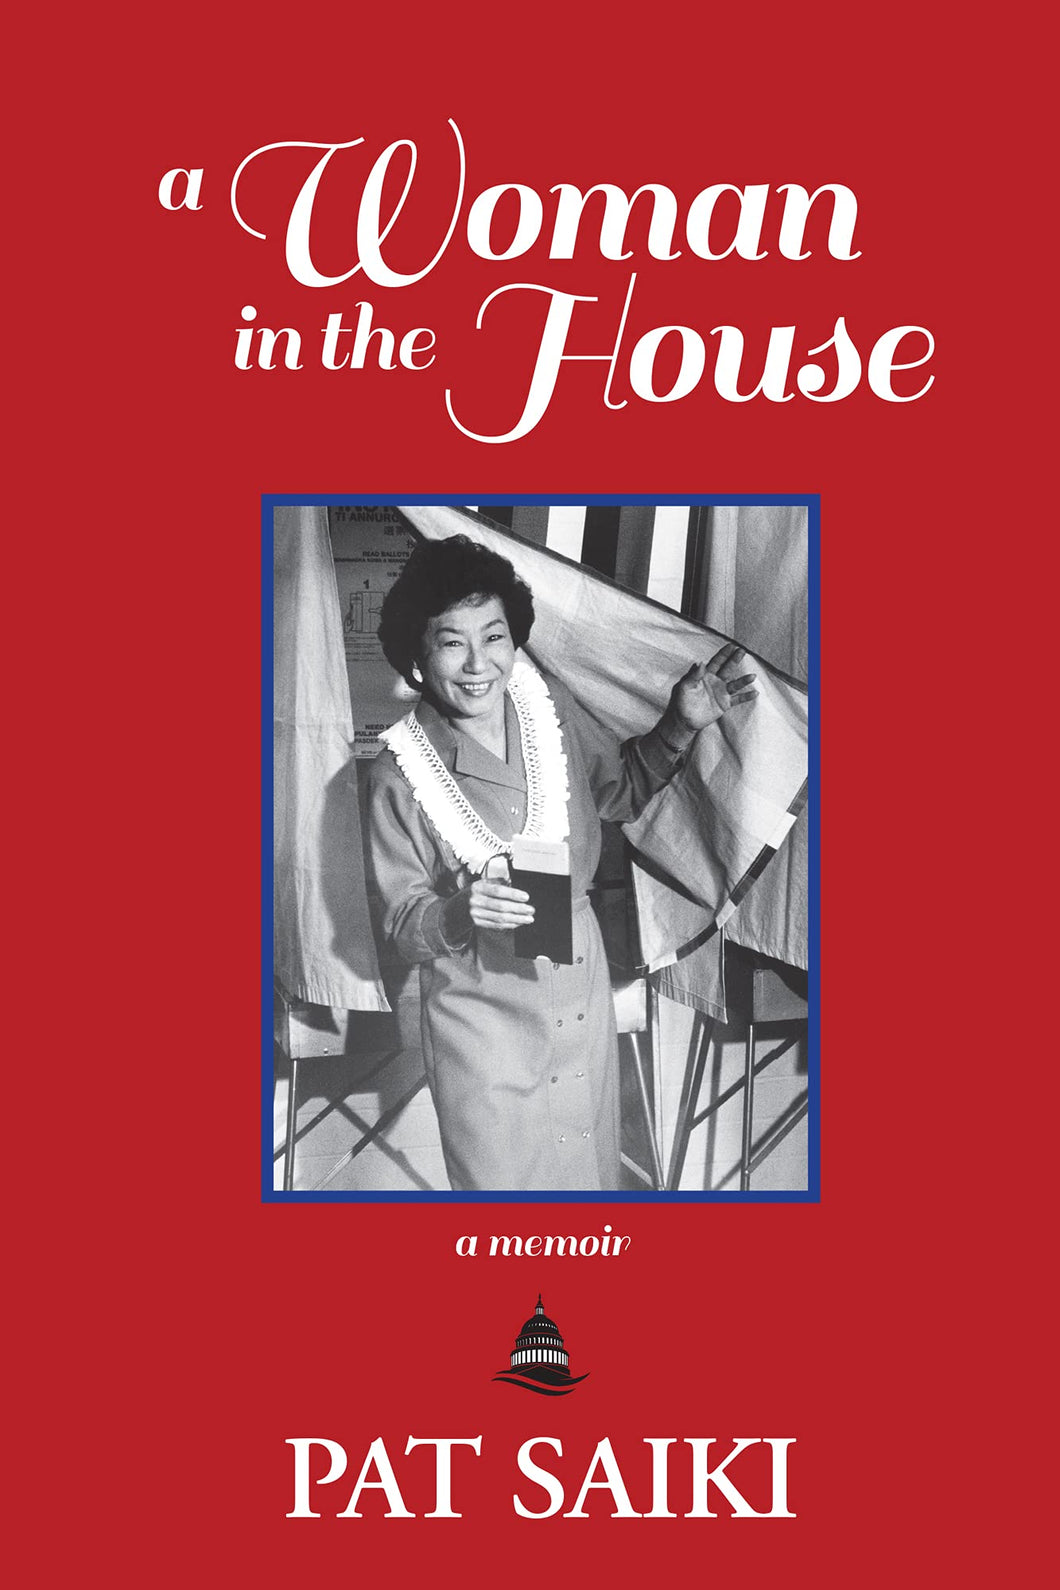 A Woman in the House by Pat Saiki